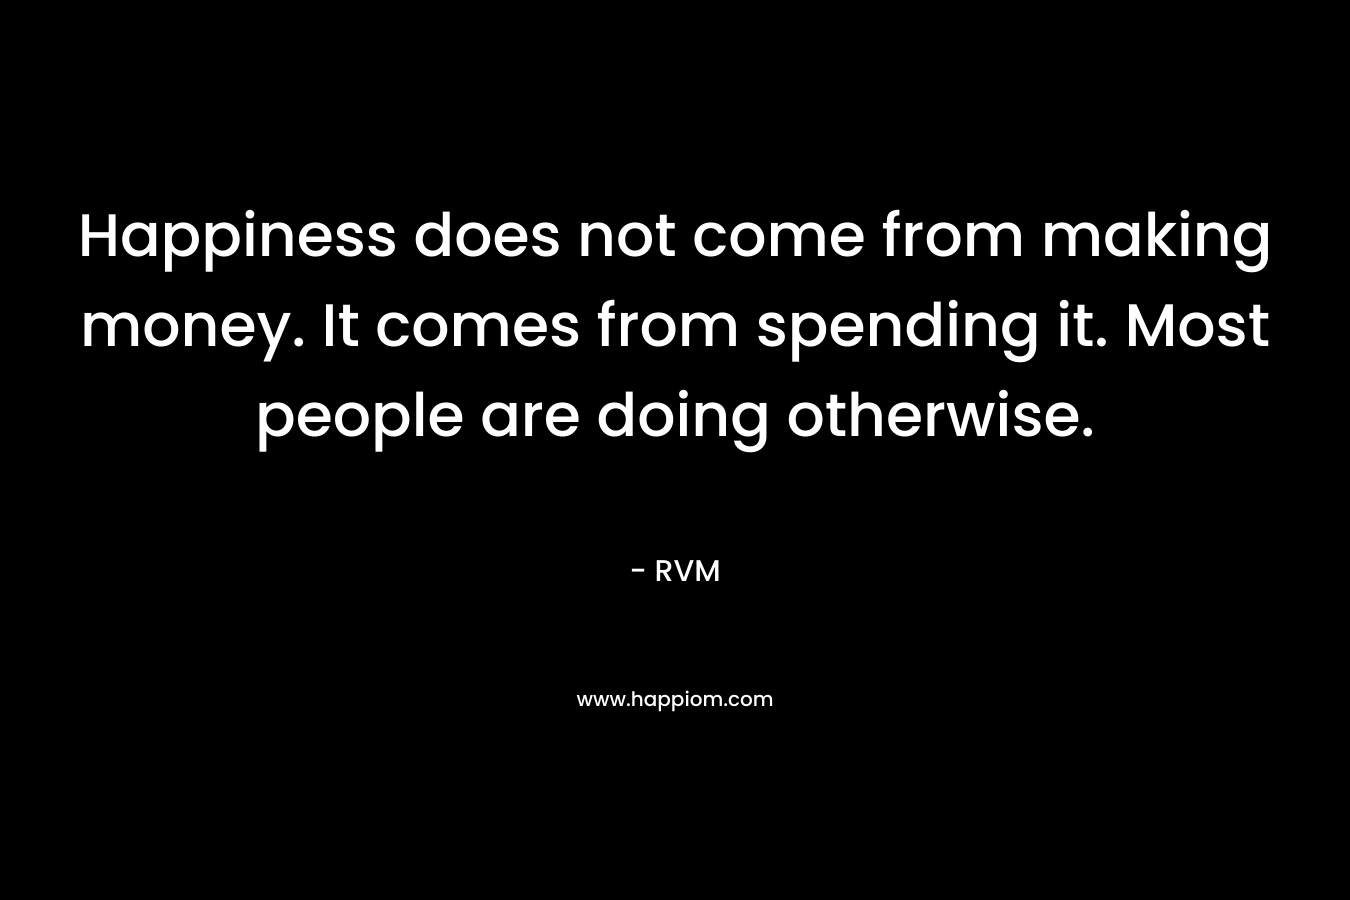 Happiness does not come from making money. It comes from spending it. Most people are doing otherwise.